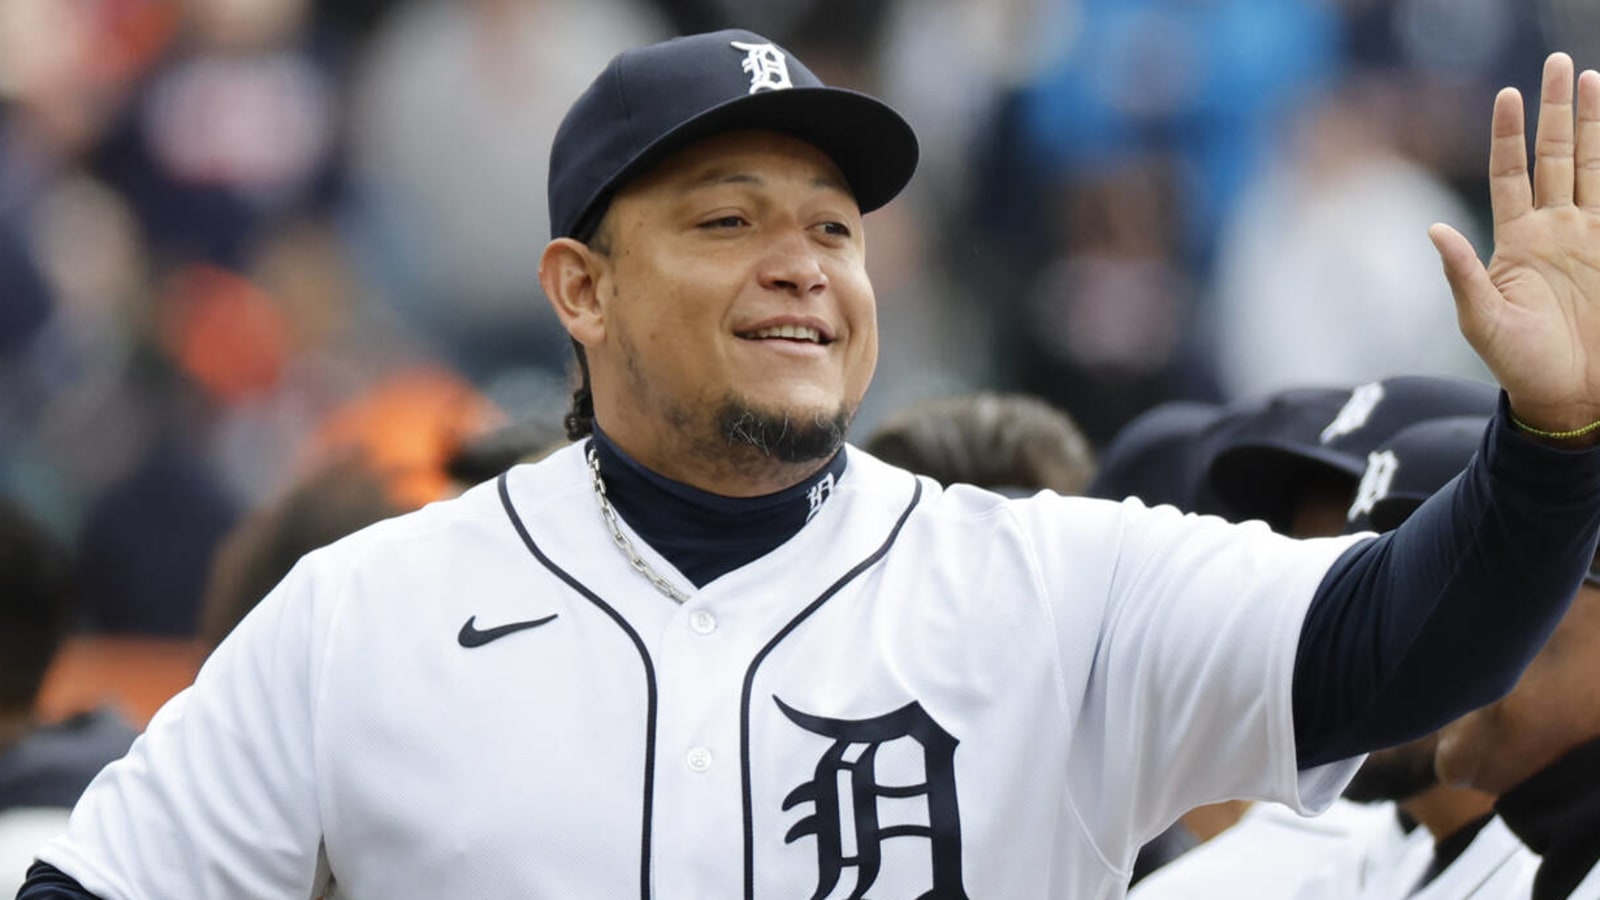 Watch: Miguel Cabrera throws ceremonial first pitch alongside Detroit icons